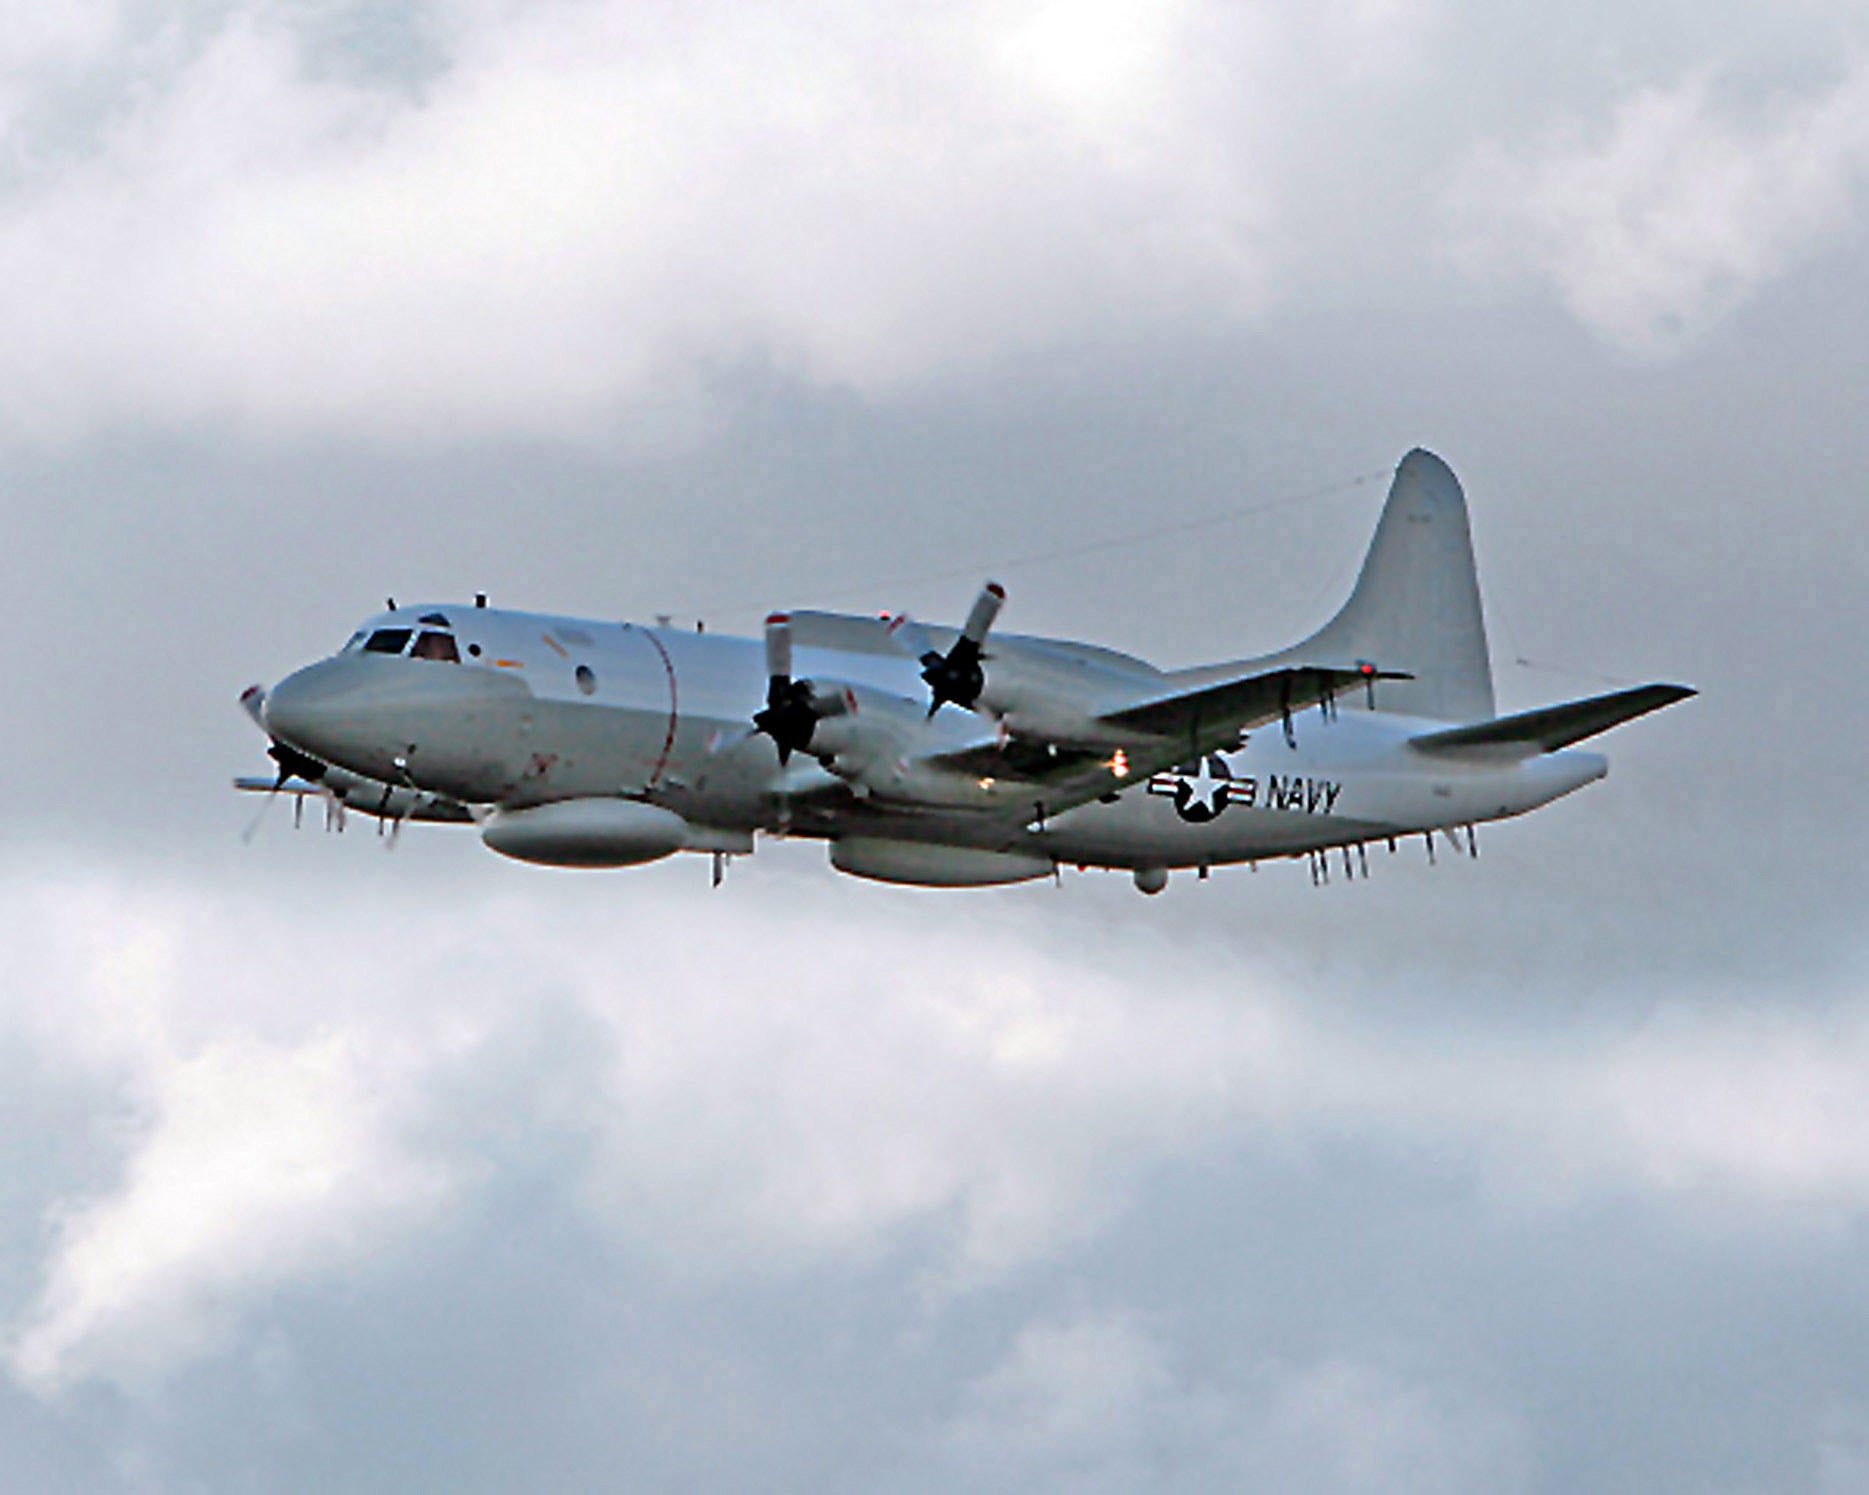 The US says its surveillance plane was on a routine flight